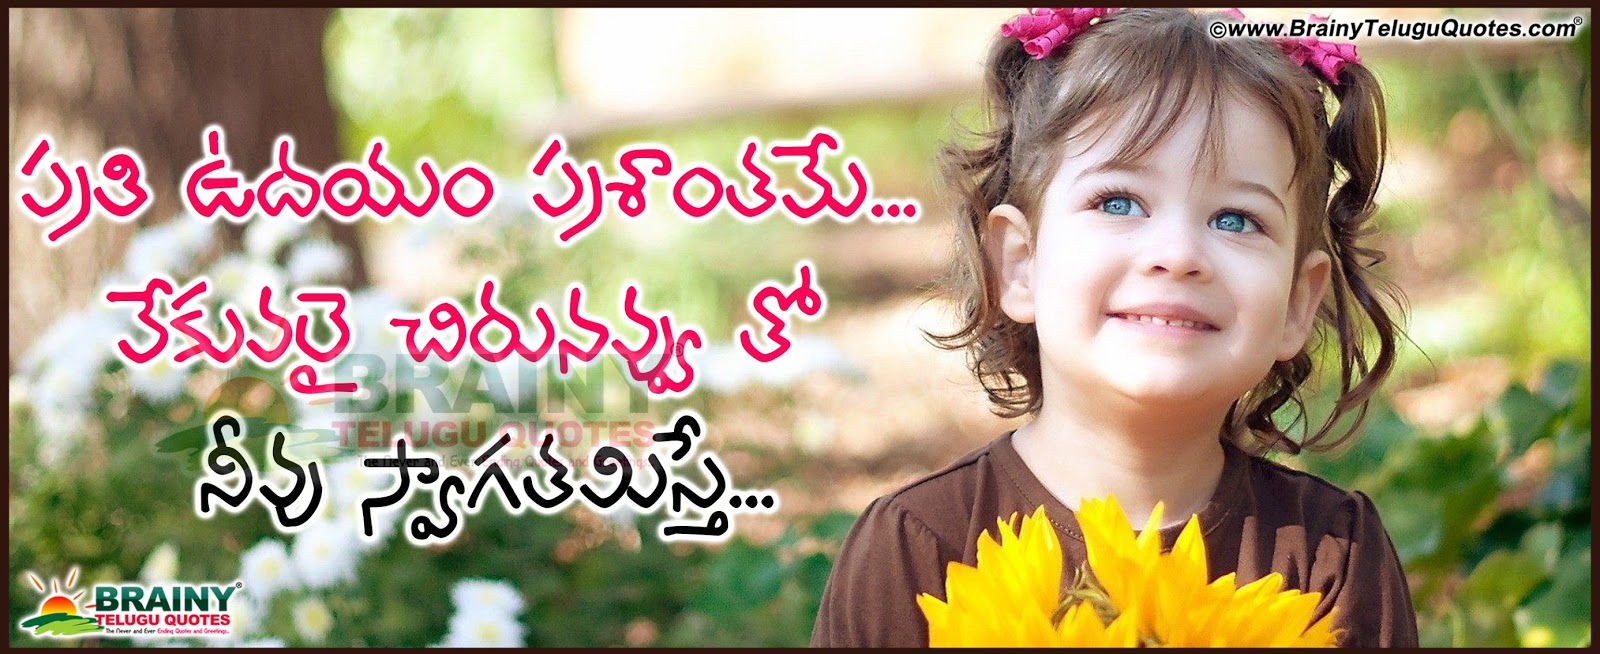 Here is a Telugu Good morning Motivational Quotes and Sayings images whatsapp profile pictures